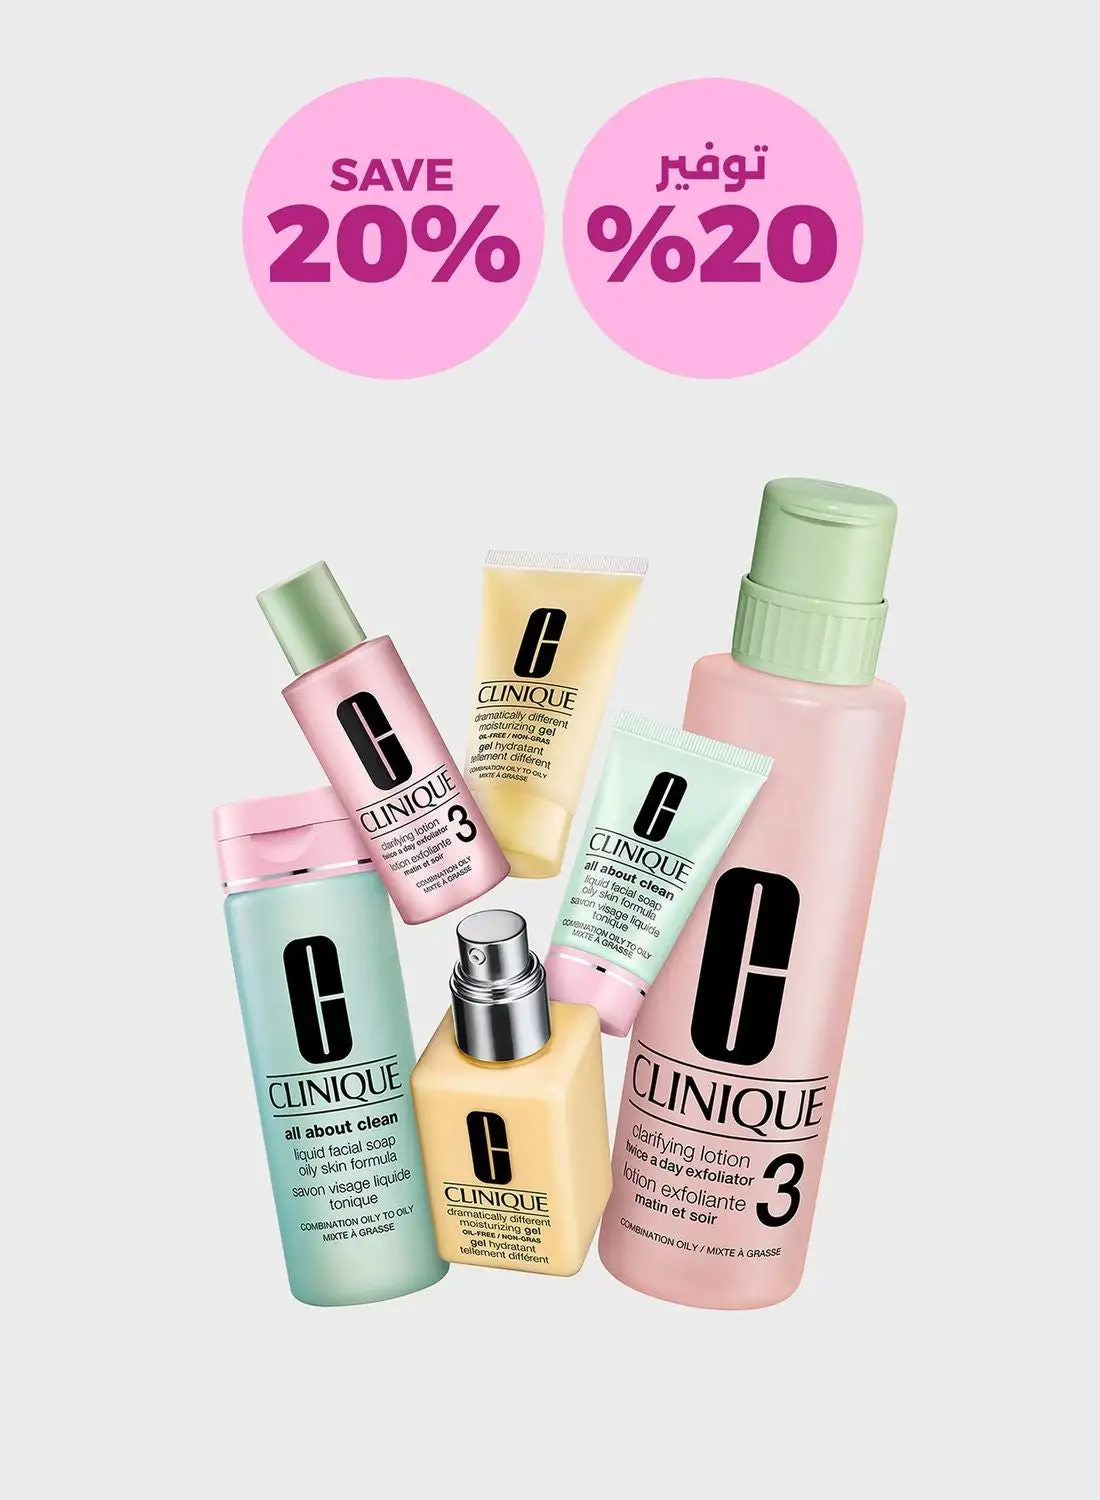 CLINIQUE Great Skin Everywhere: For Combination Oily Skin, Savings 20%